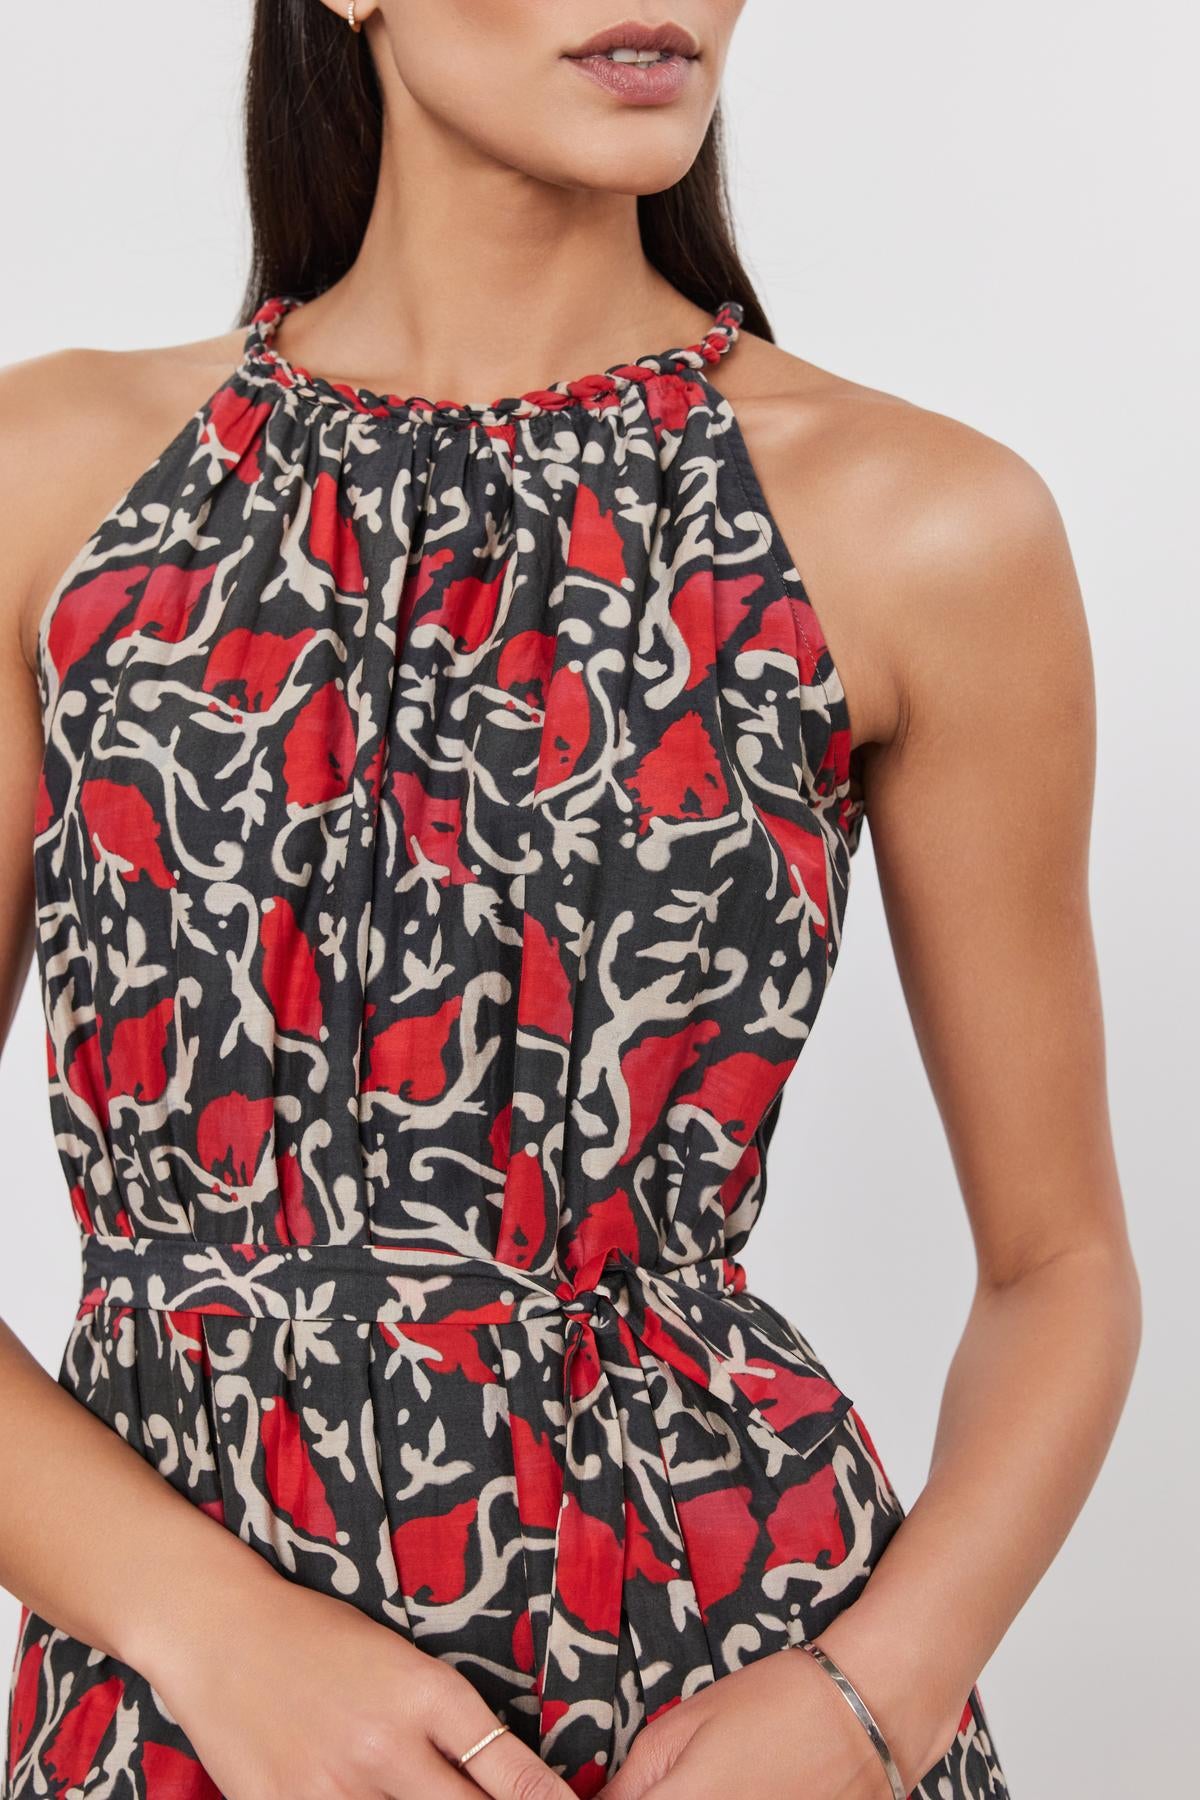 Woman wearing a GHITA DRESS by Velvet by Graham & Spencer, a red, black, and white patterned silk cotton voile dress with a halter-style neckline and a tie at the waist.-36910024556737